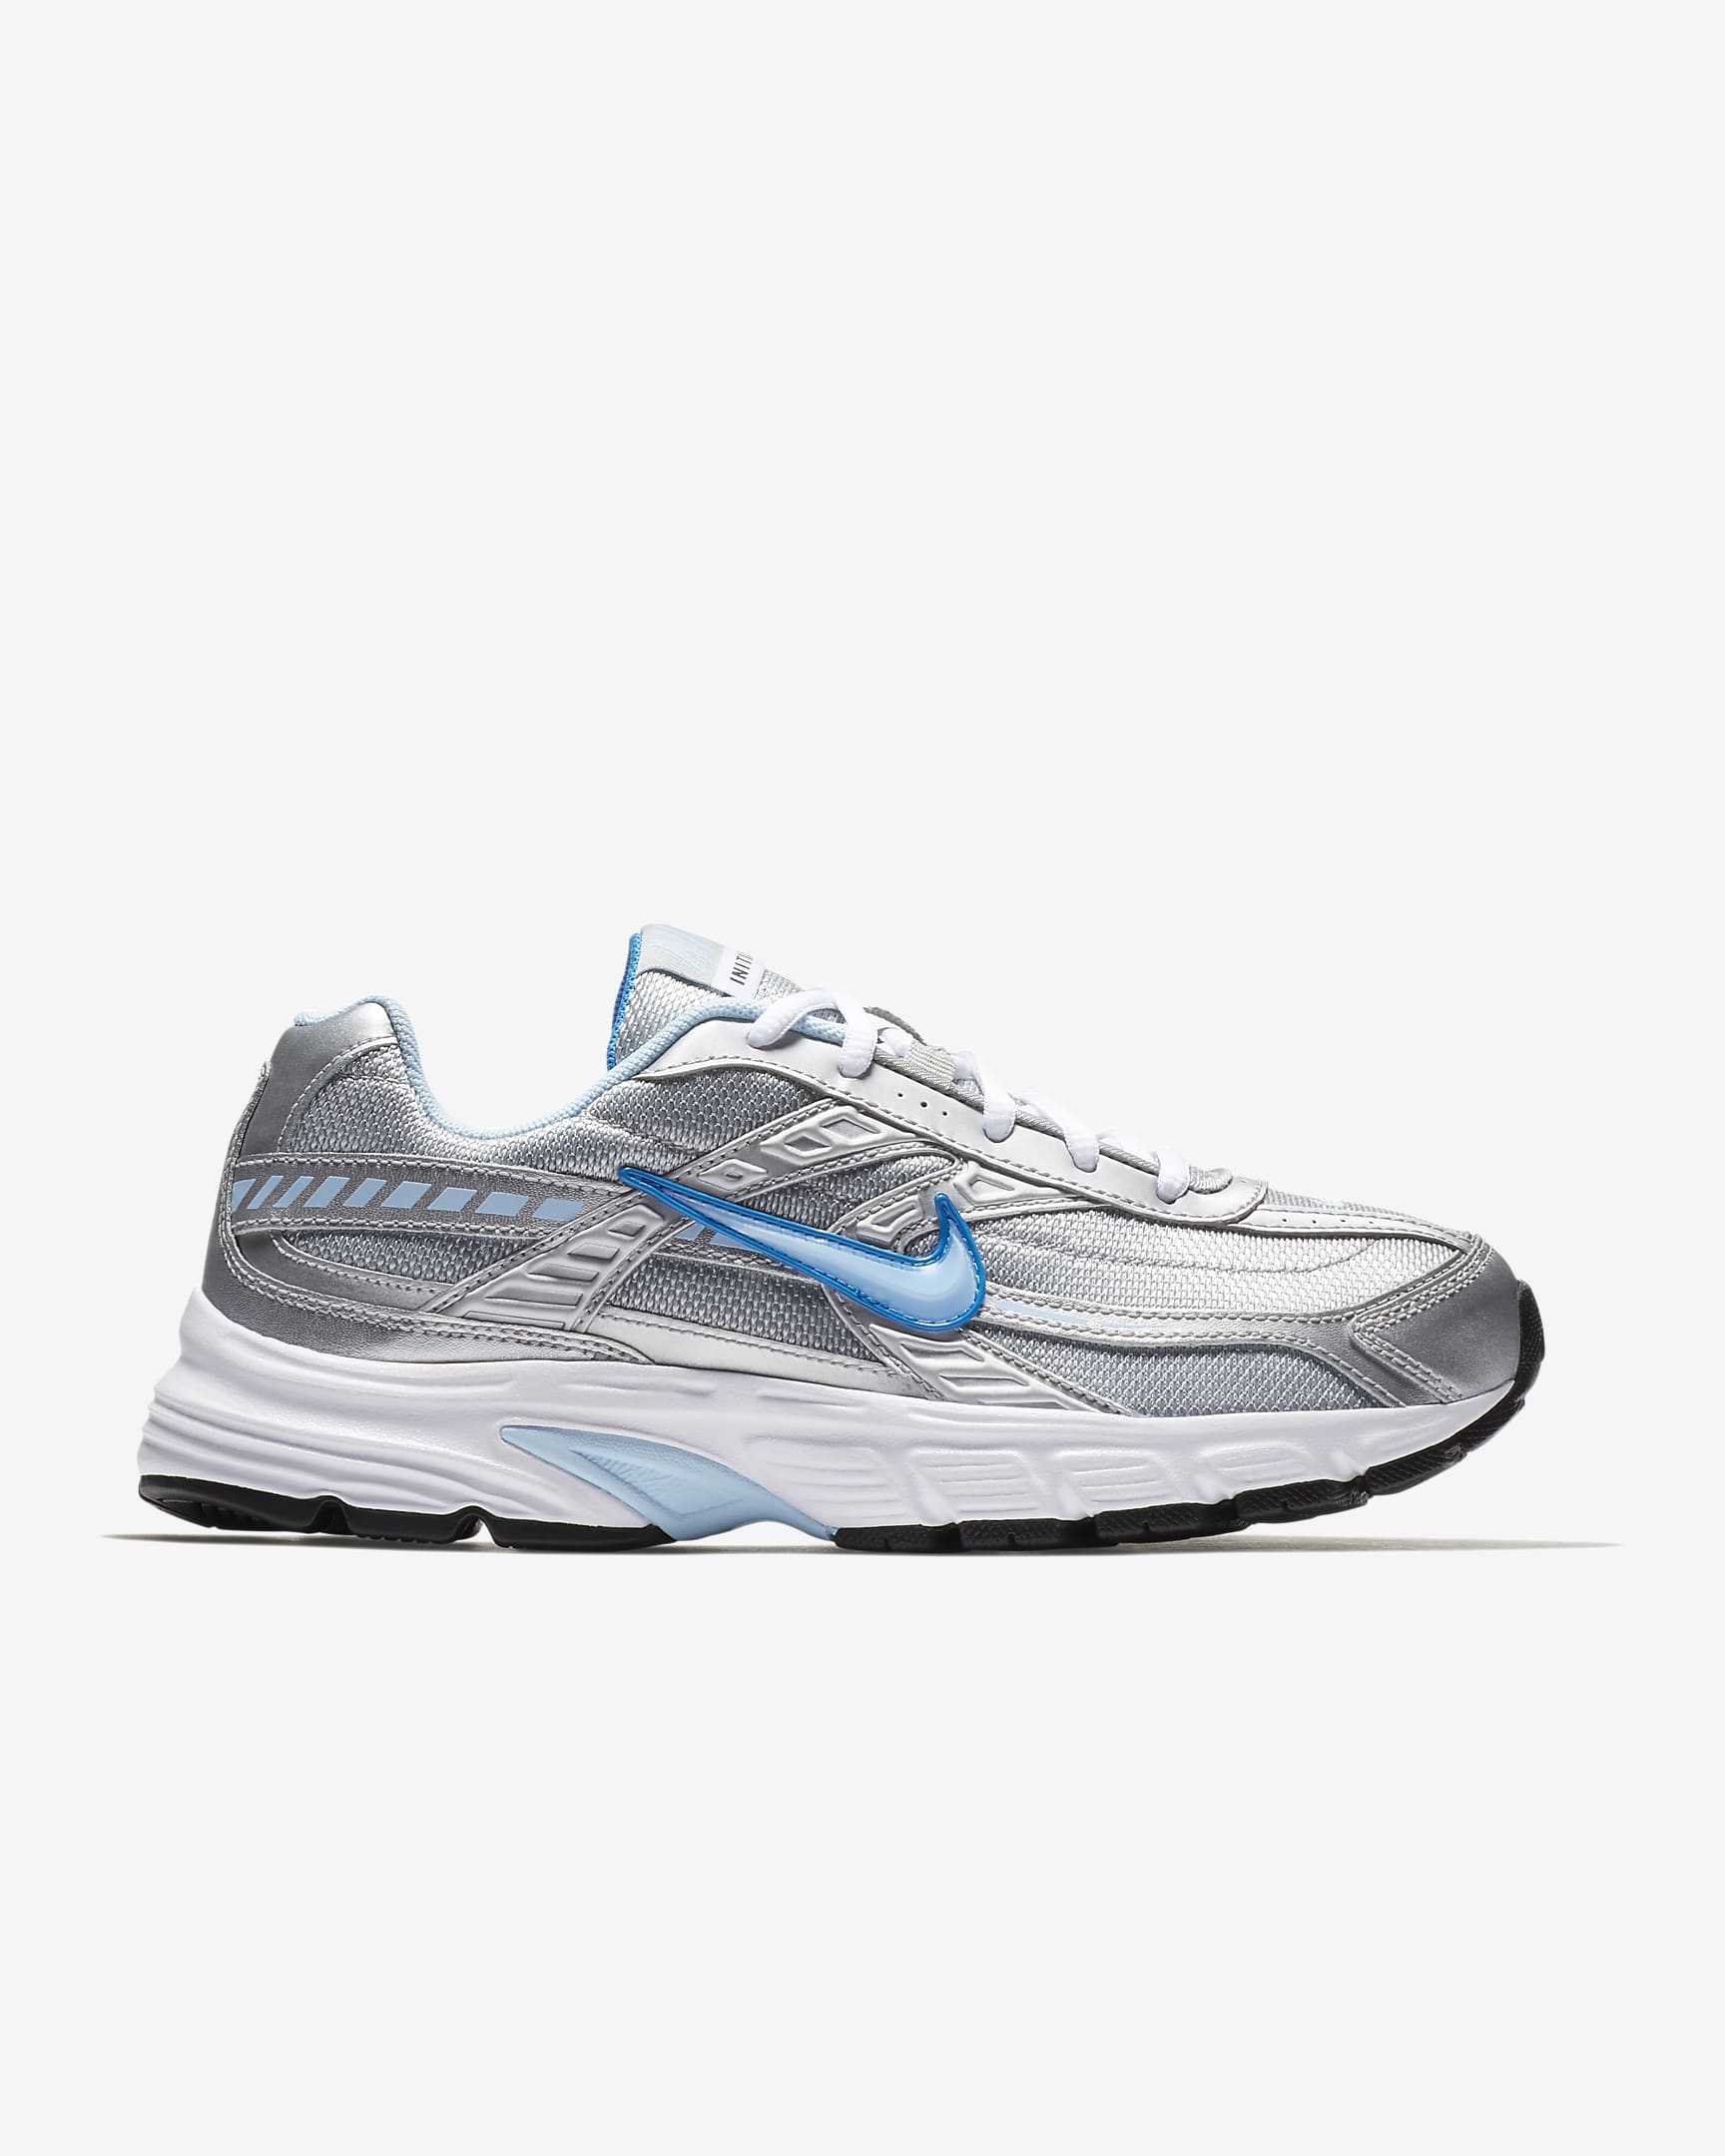 Chaussure Nike Initiator pour femme - Metallic Silver/Blanc/Cool Grey/Ice Blue